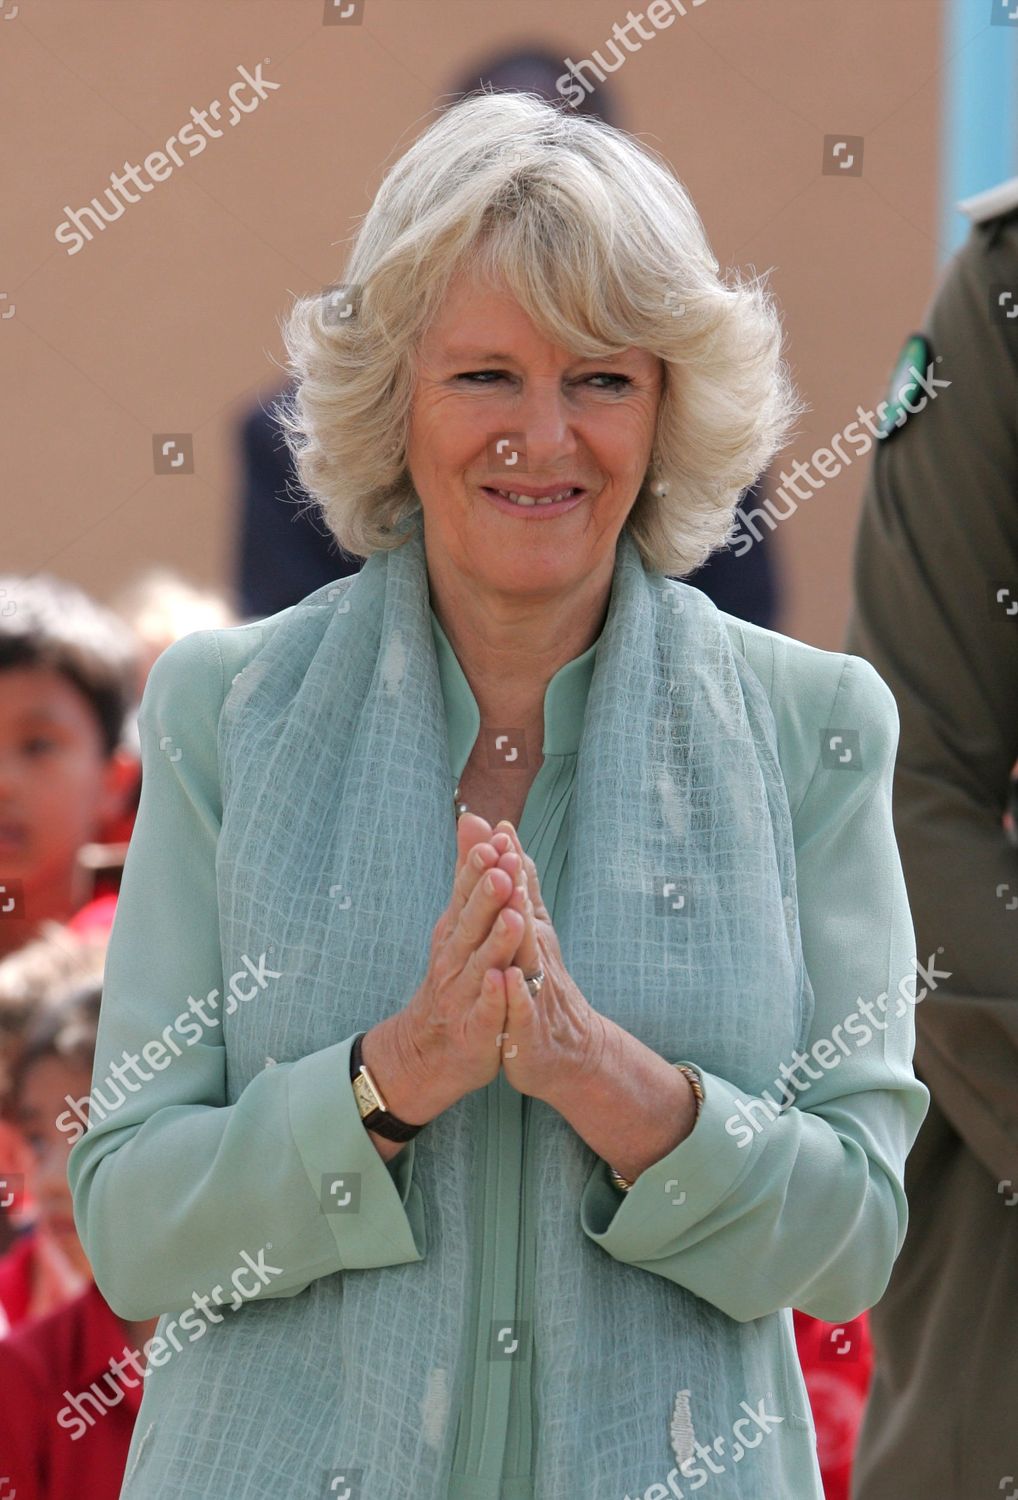 prince-charles-and-camilla-duchess-of-cornwall-visiting-the-english-school-in-doha-qatar-shutterstock-editorial-646409s.jpg